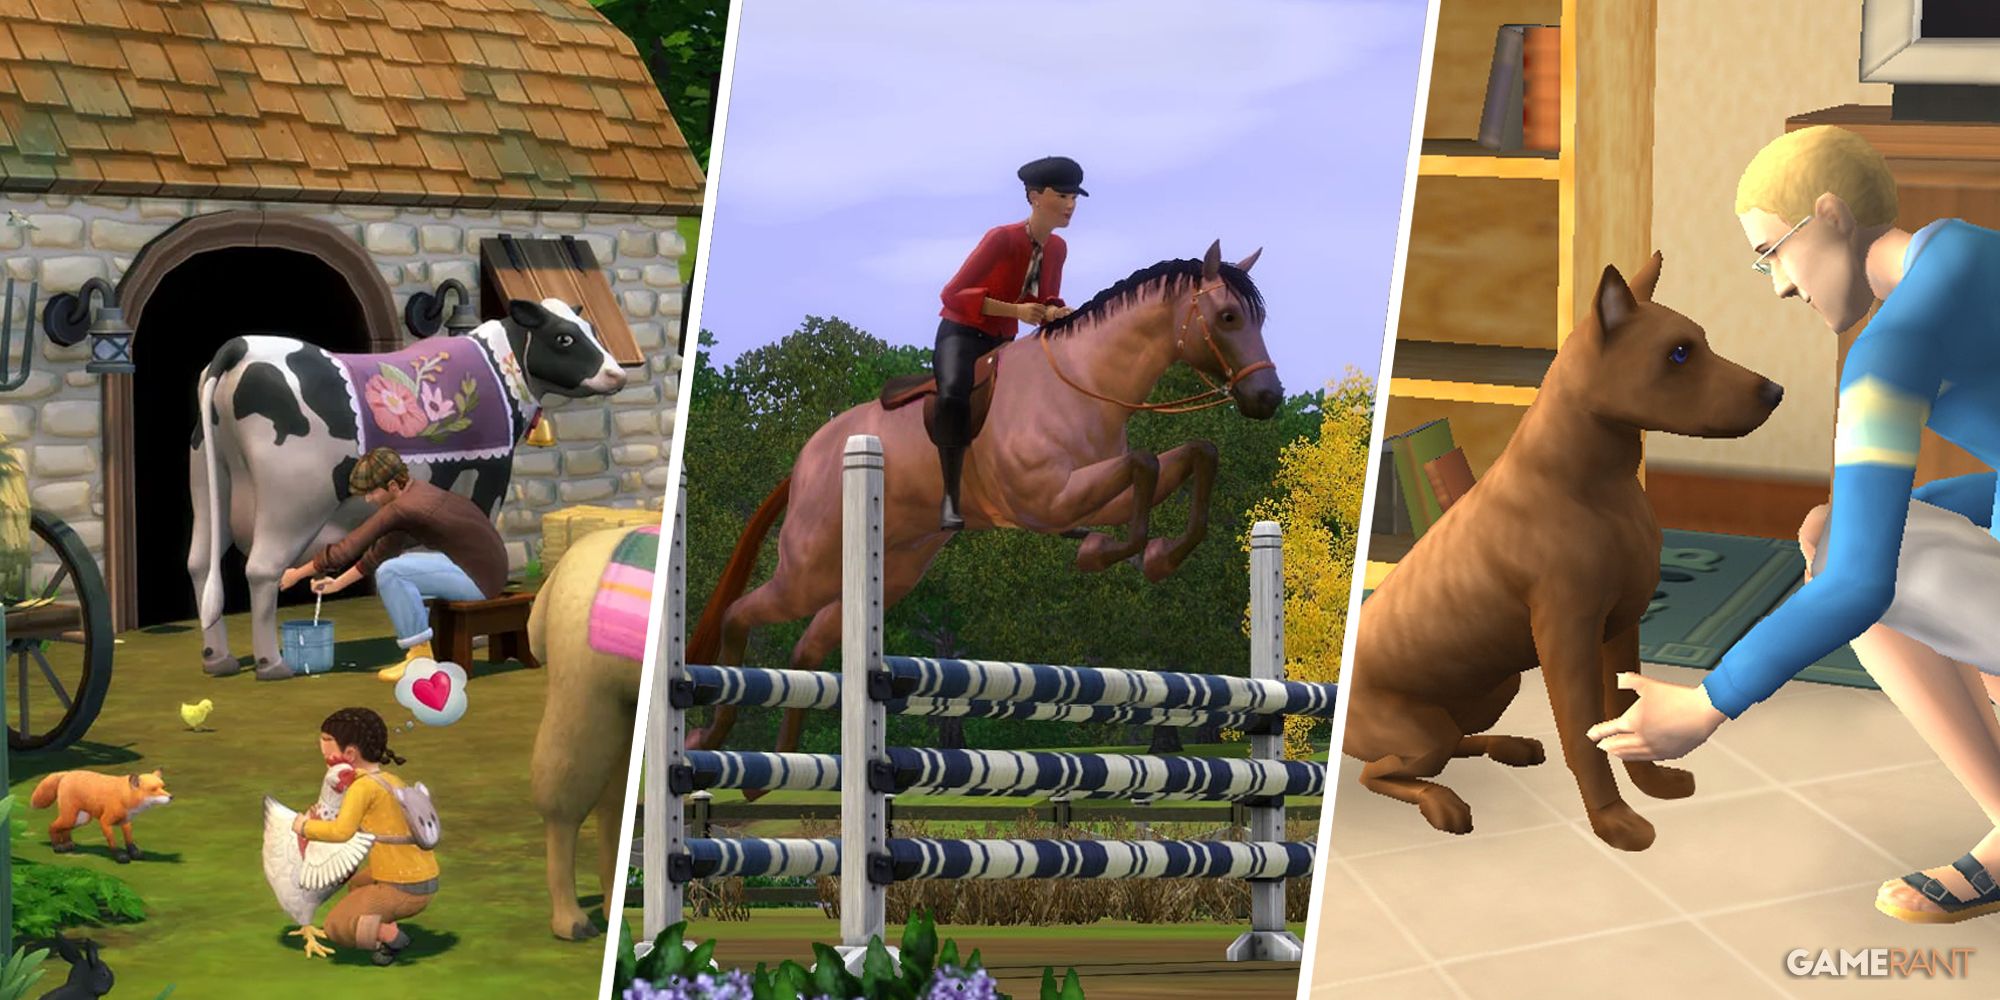 The Sims 4: Cottage Living, The Sims 3: Pets, and The Sims 2: Pets